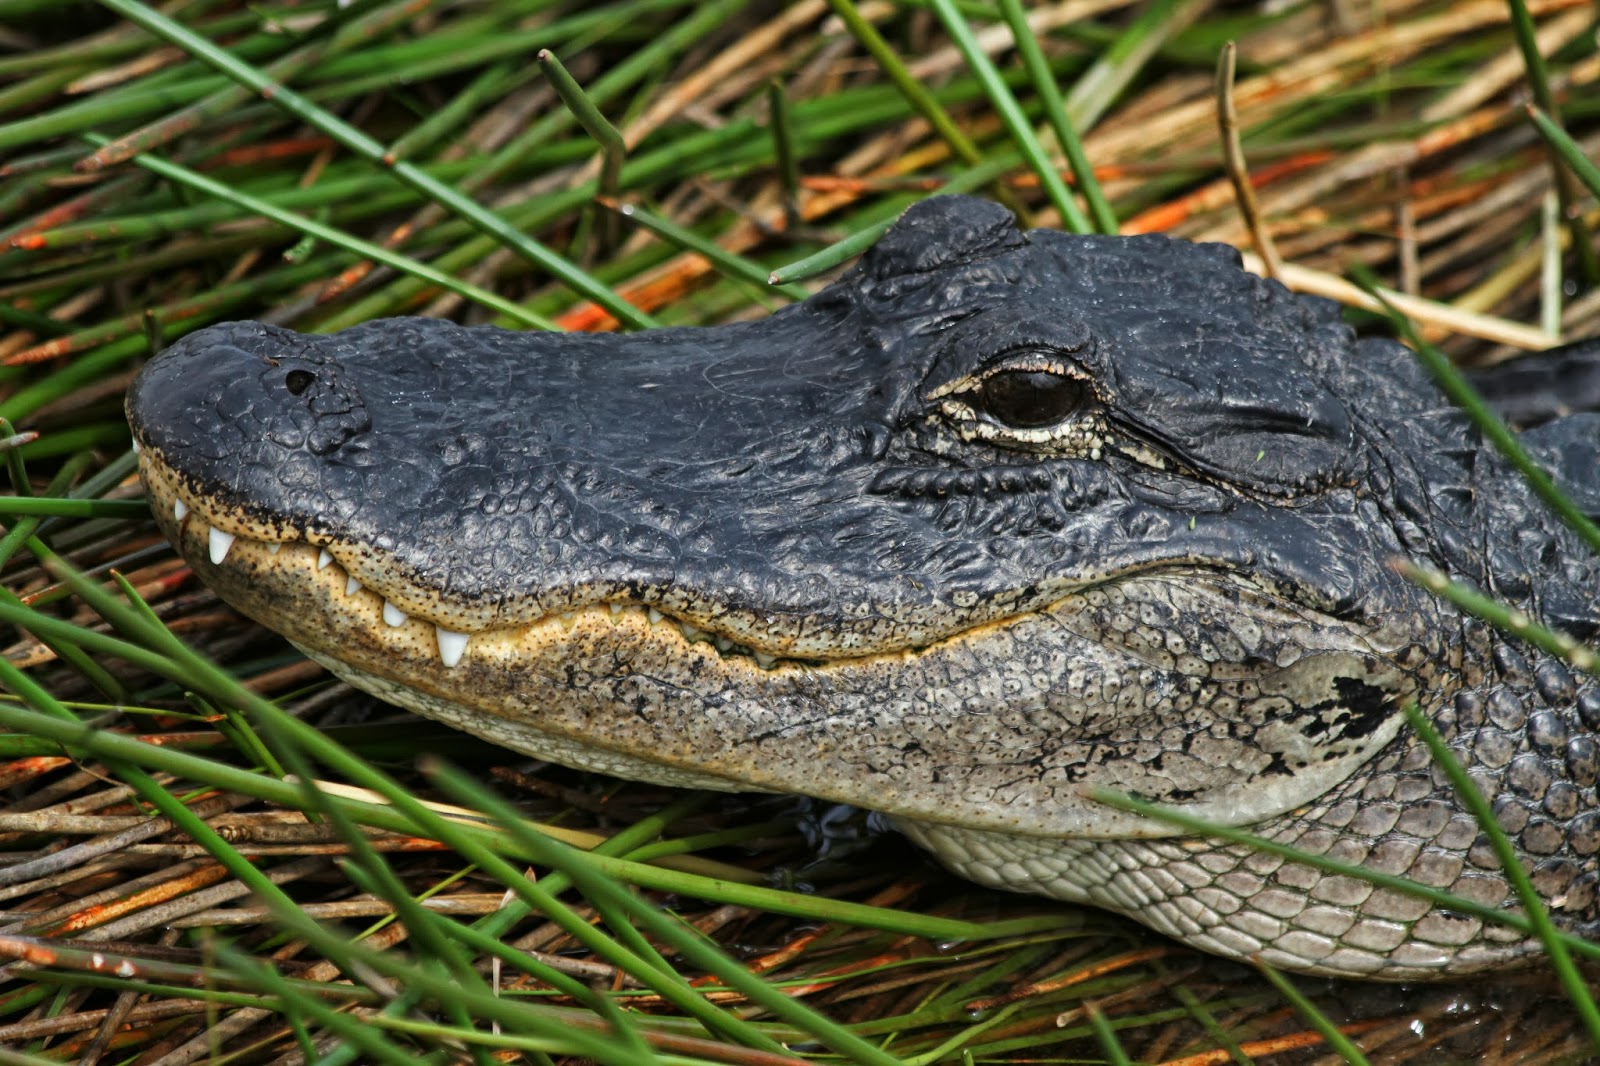 Close up of a crocodile with a feisty grimace.